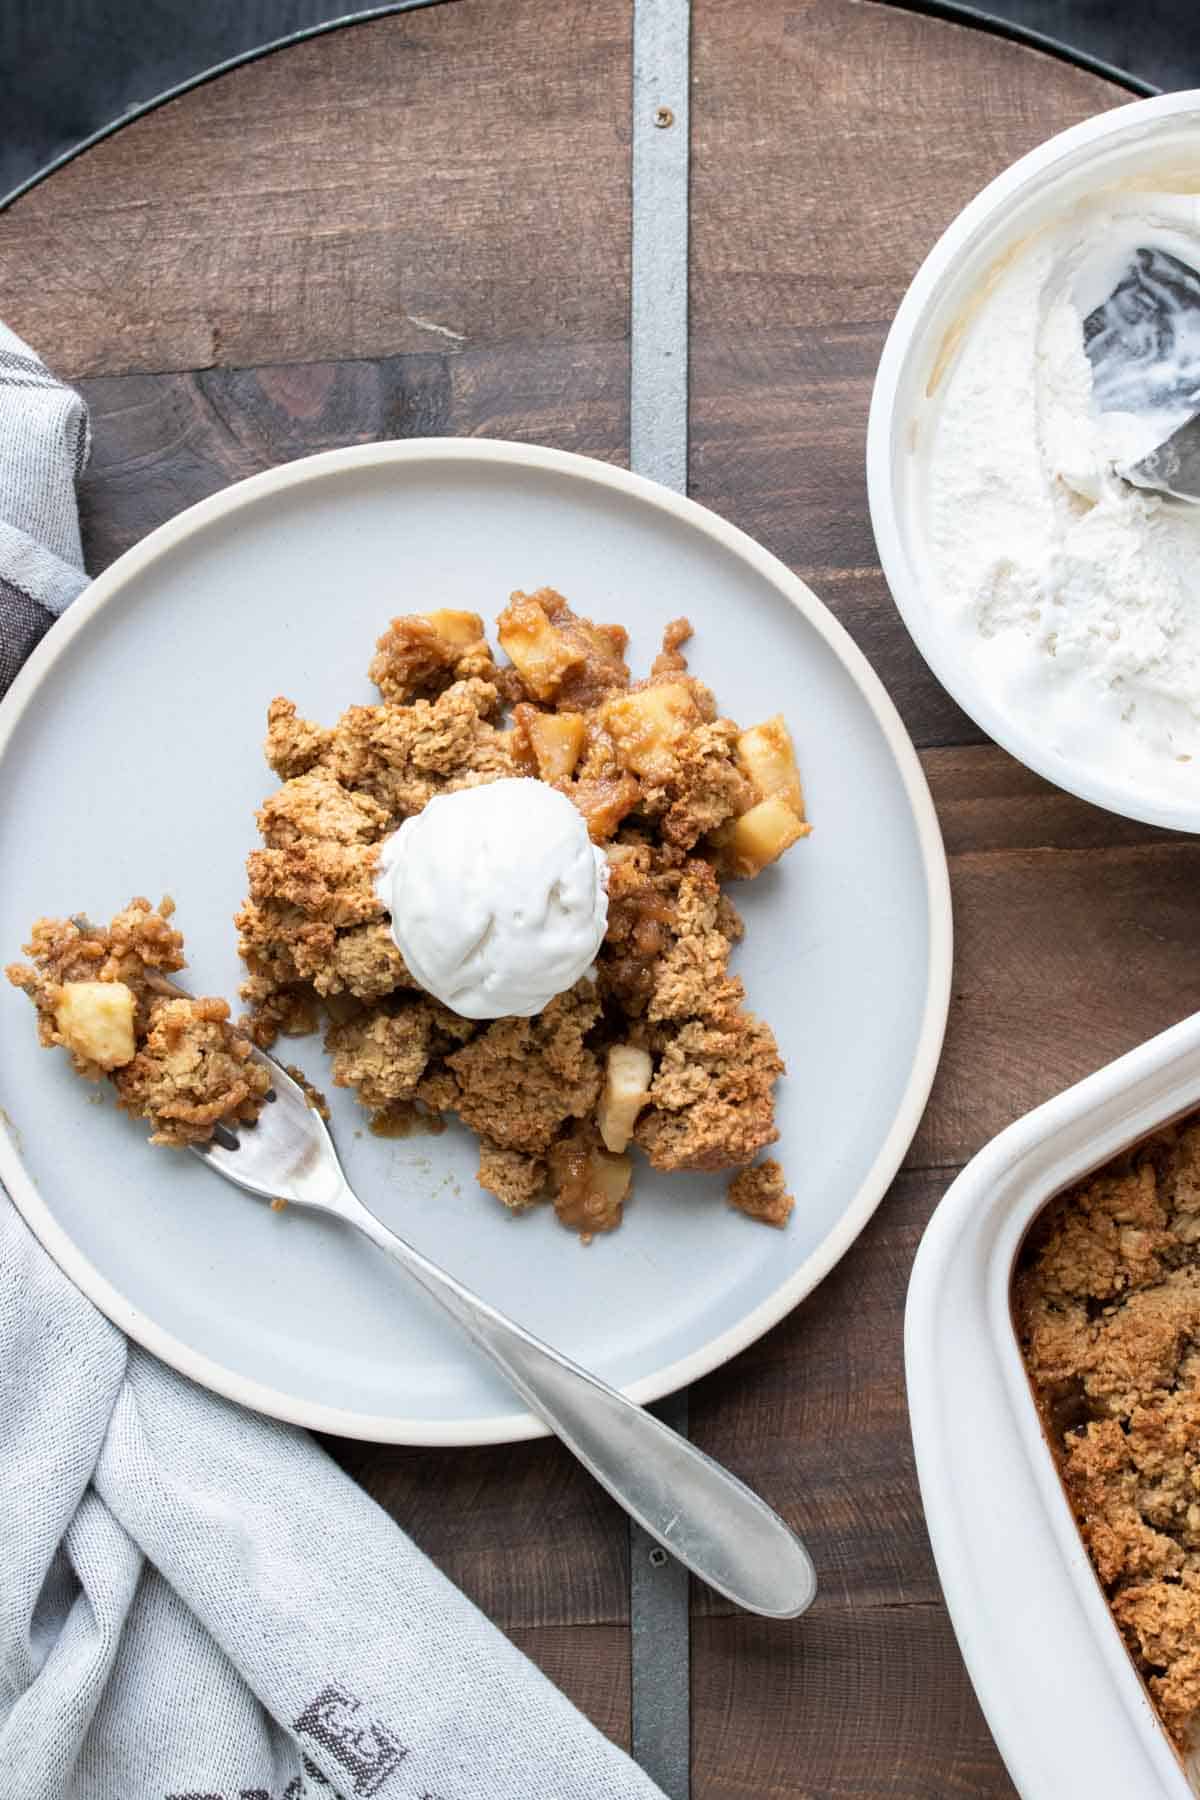 Top view of apple crisp with whipped cream on a grey plate.